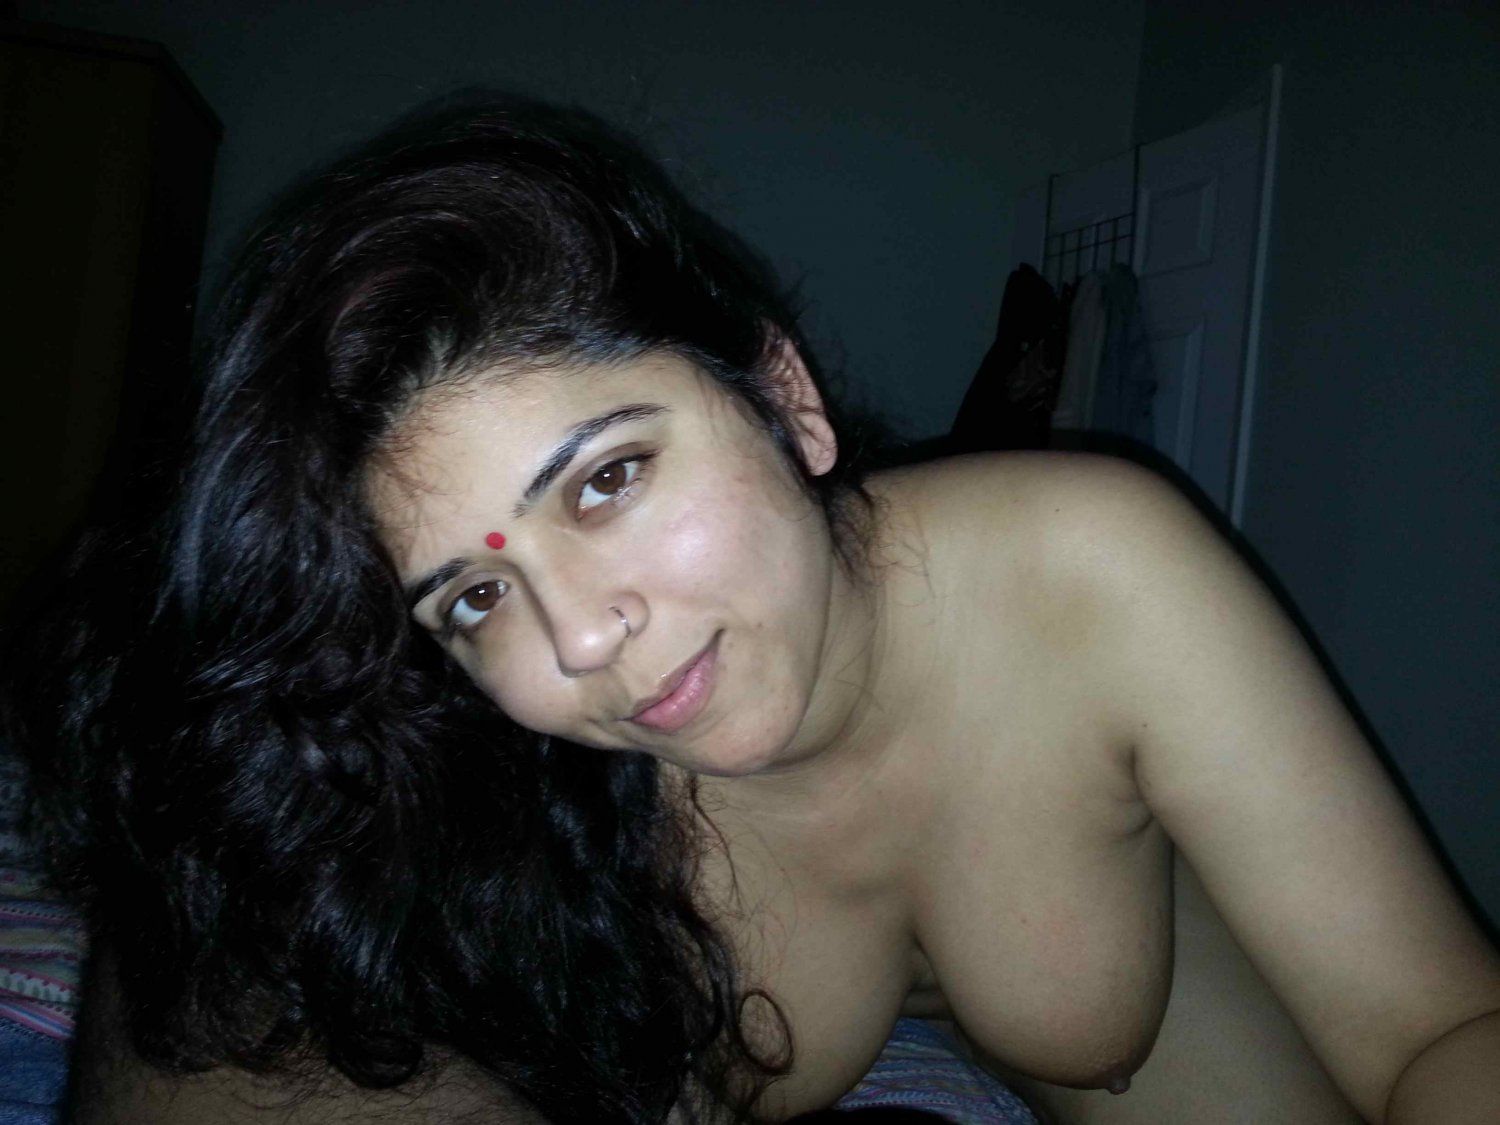 Hot indian wife - Porn Videos and Photos picture